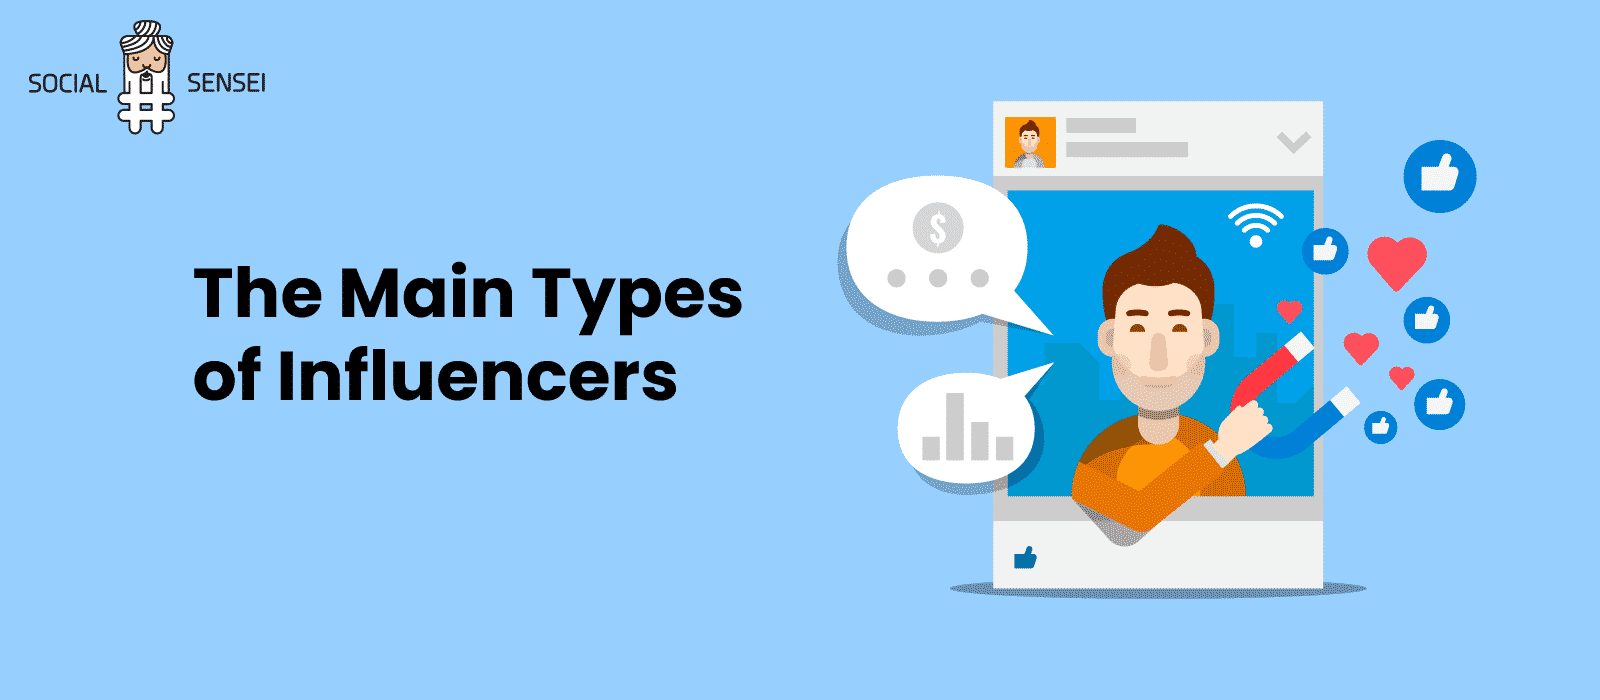 The Main Types of Influencers